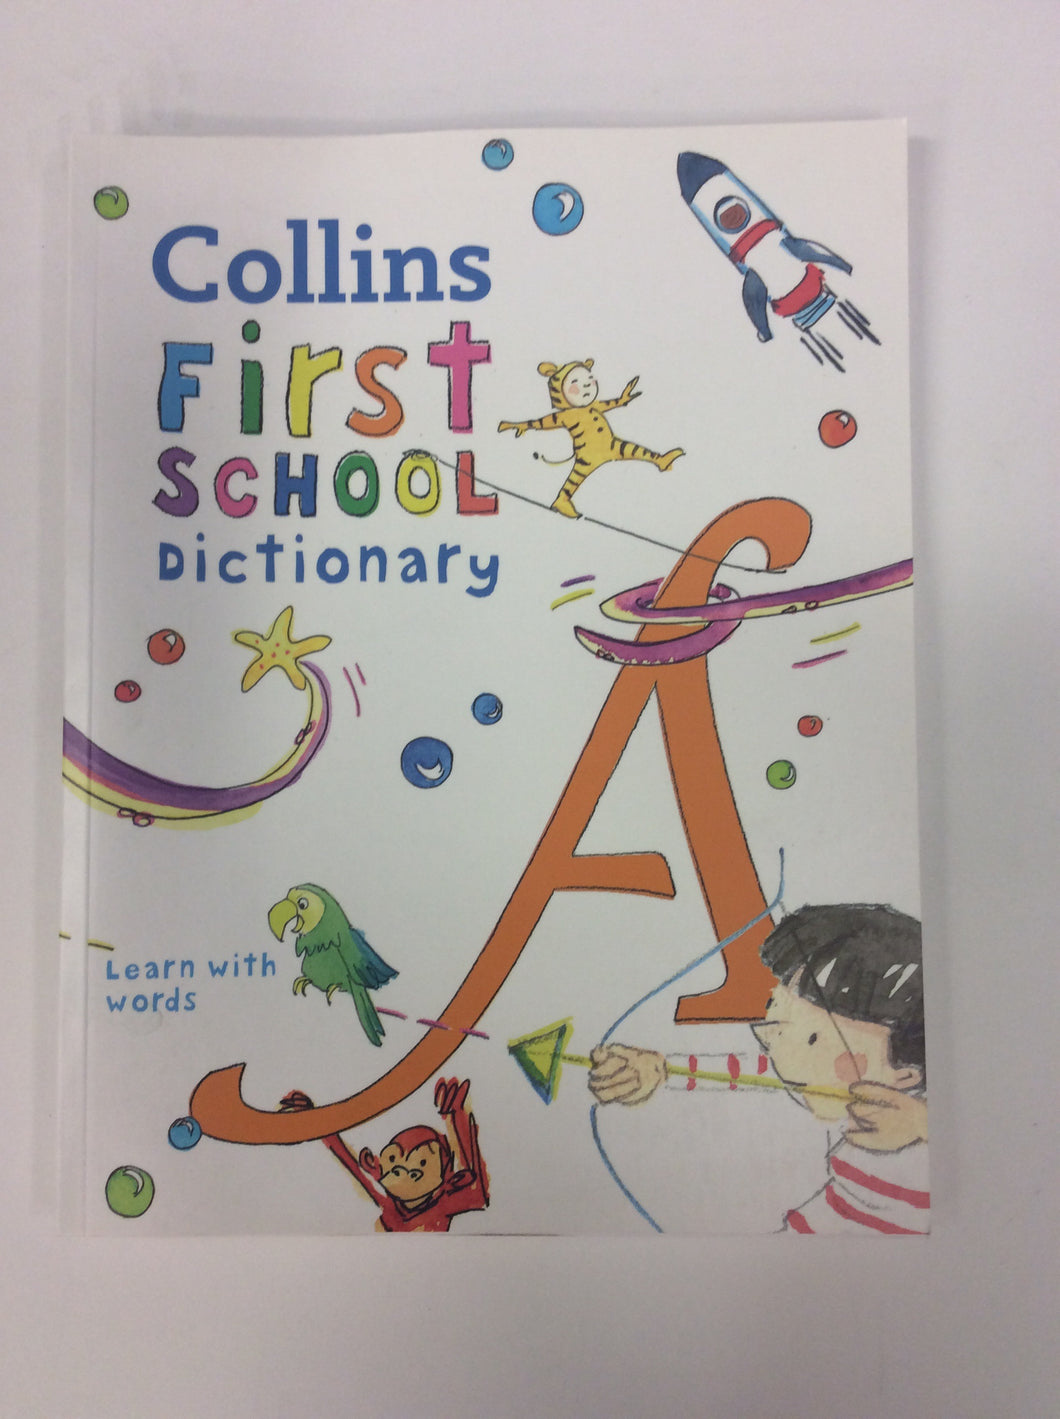 Collins first school dictionary